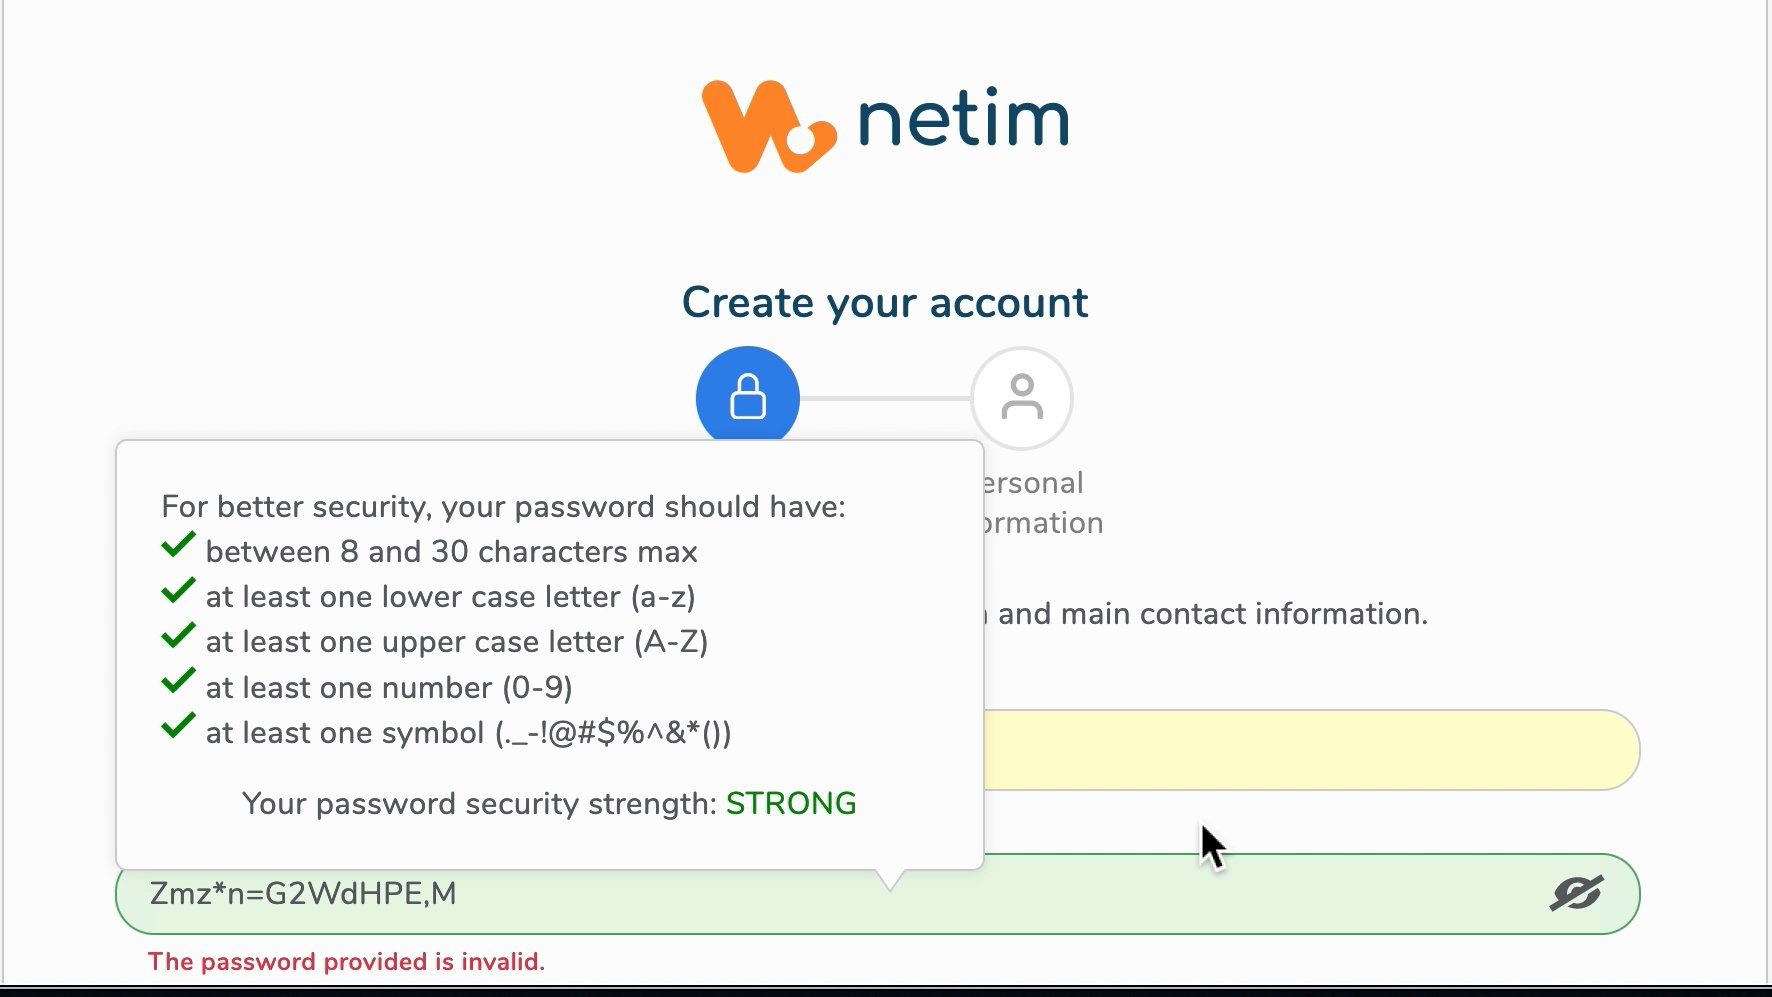 Netim. Create your account. Your password should have at least one symbol. The password provided is invalid.